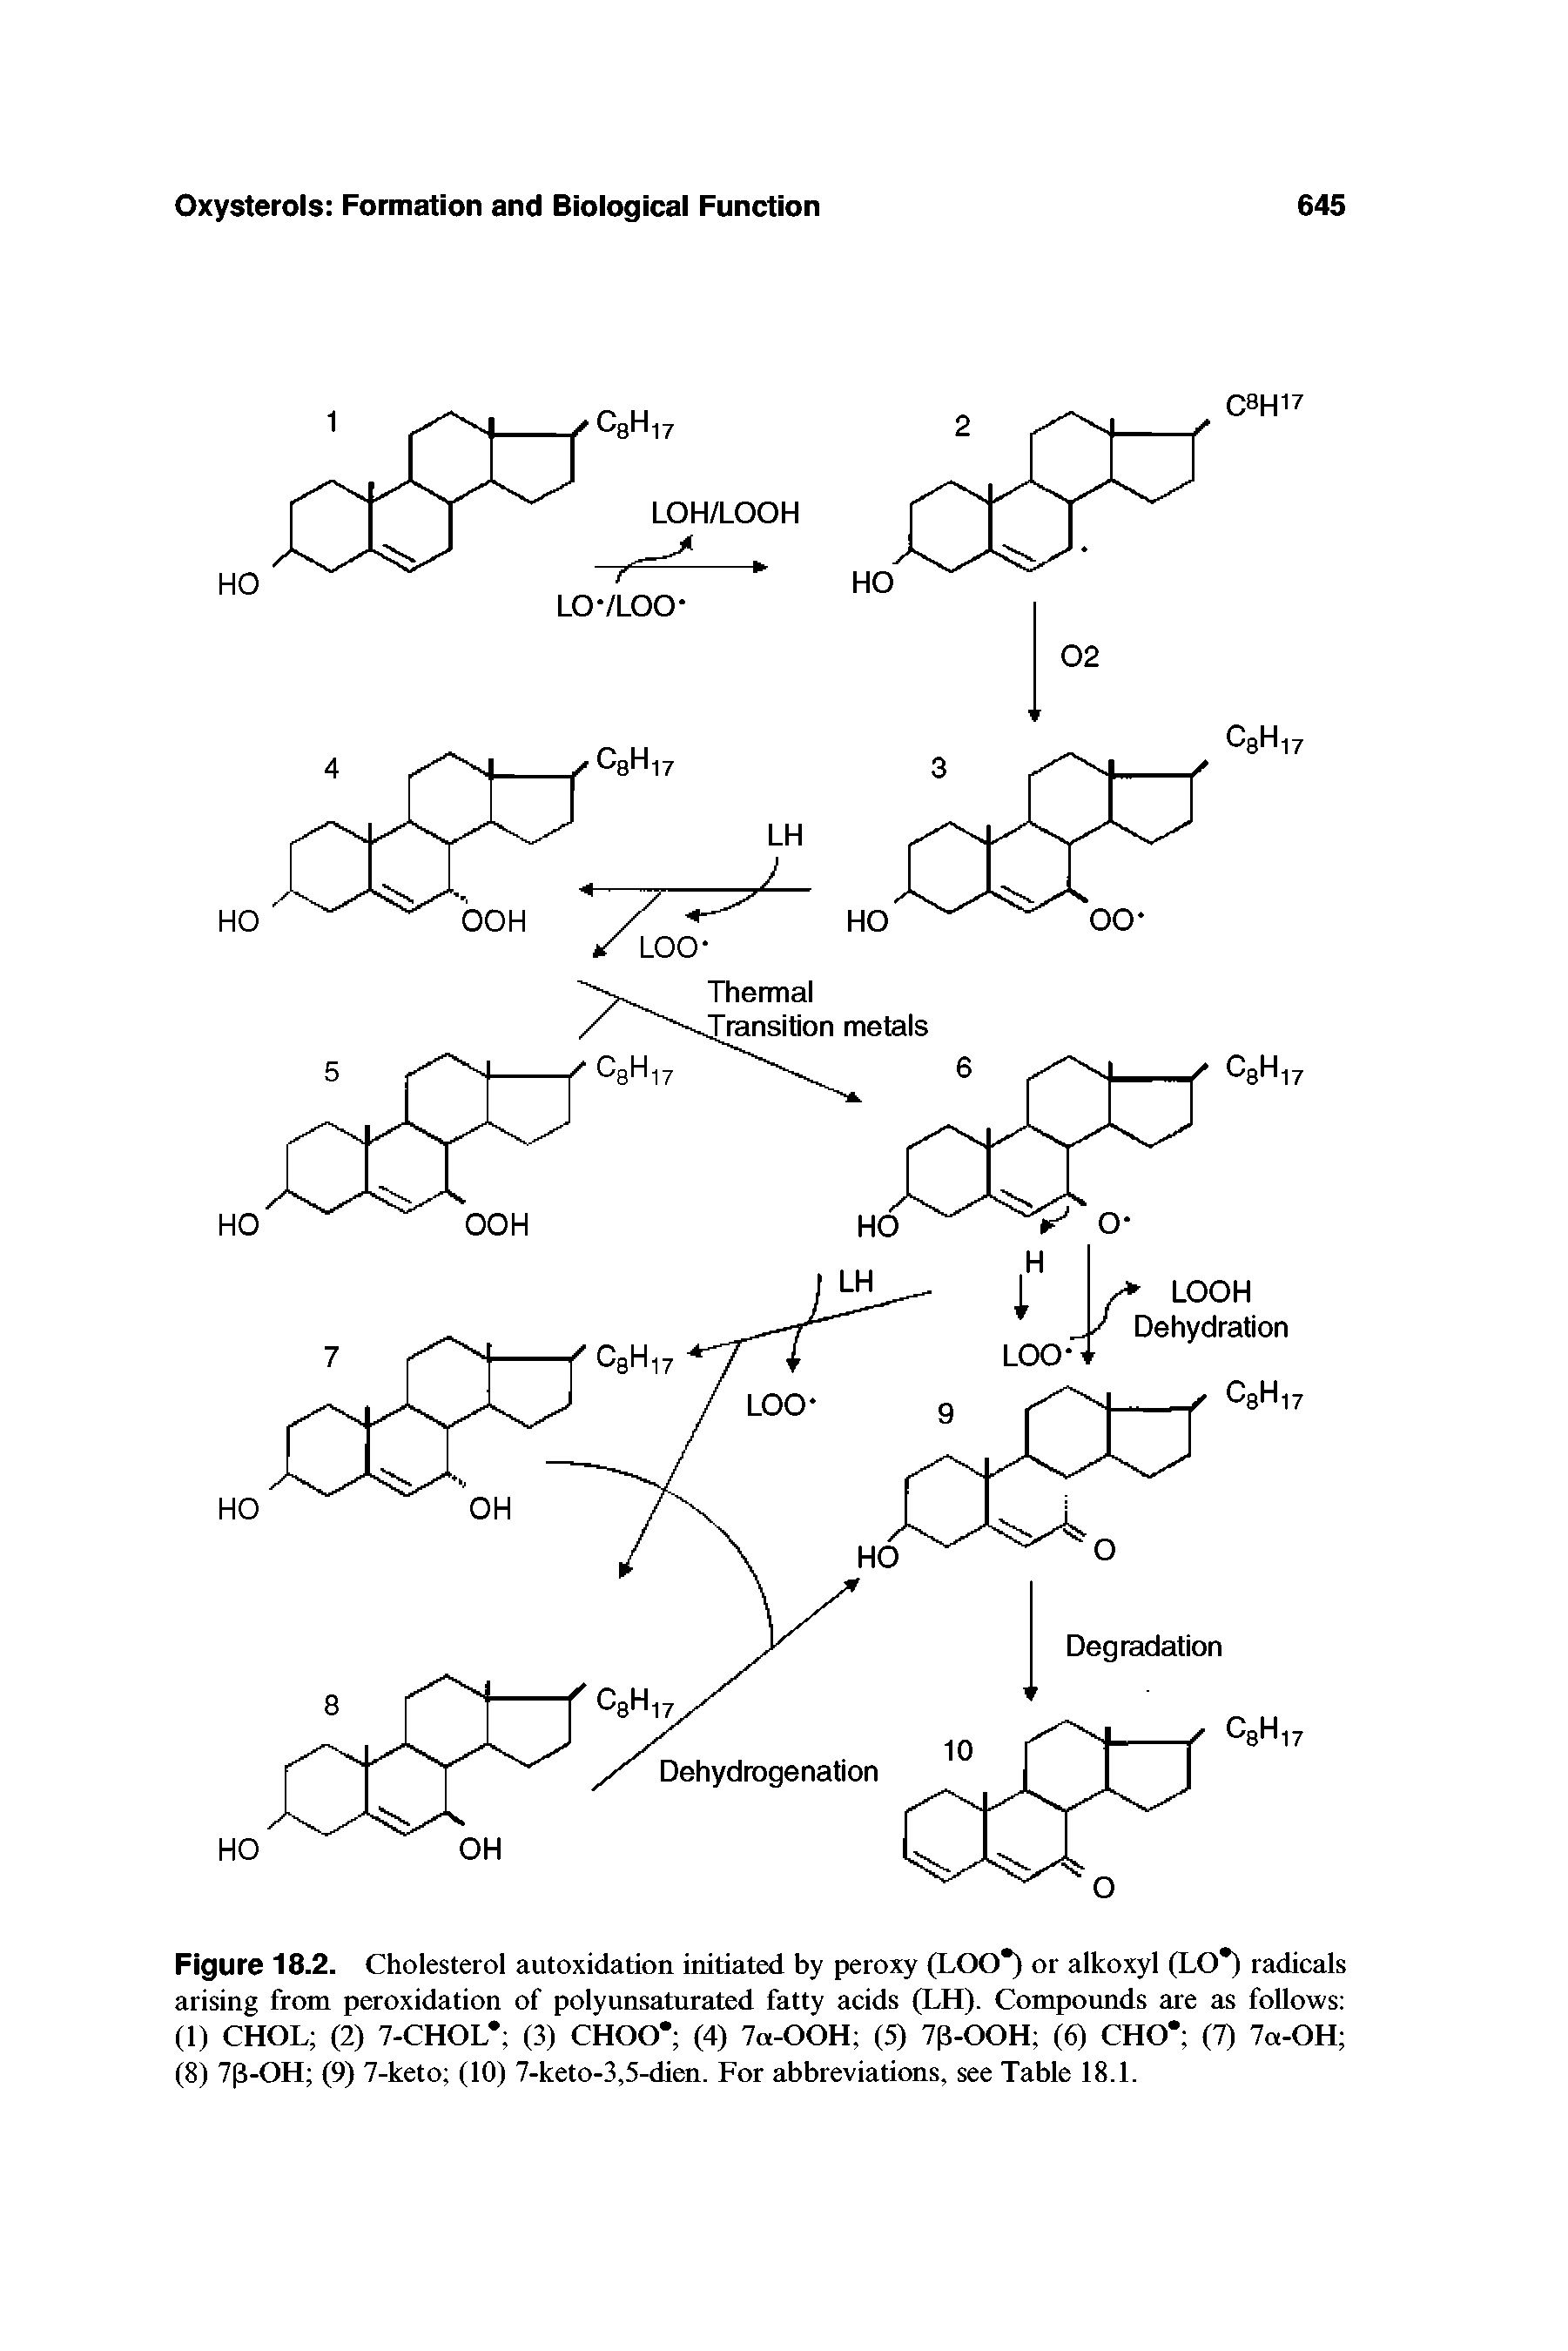 Figure 18.2. Cholesterol autoxidation initiated by peroxy (LOO ) or alkoxyl (LO ) radicals arising from peroxidation of polyunsaturated fatty acids (LH). Compounds are as follows (1) CHOL (2) 7-CHOL (3) CHOO (4) 7a-OOH (5) 7fLOOH (6) CHO (7) 7a-OH (8) 7(3-OH (9) 7-keto (10) 7-keto-3,5-dien. For abbreviations, see Table 18.1.